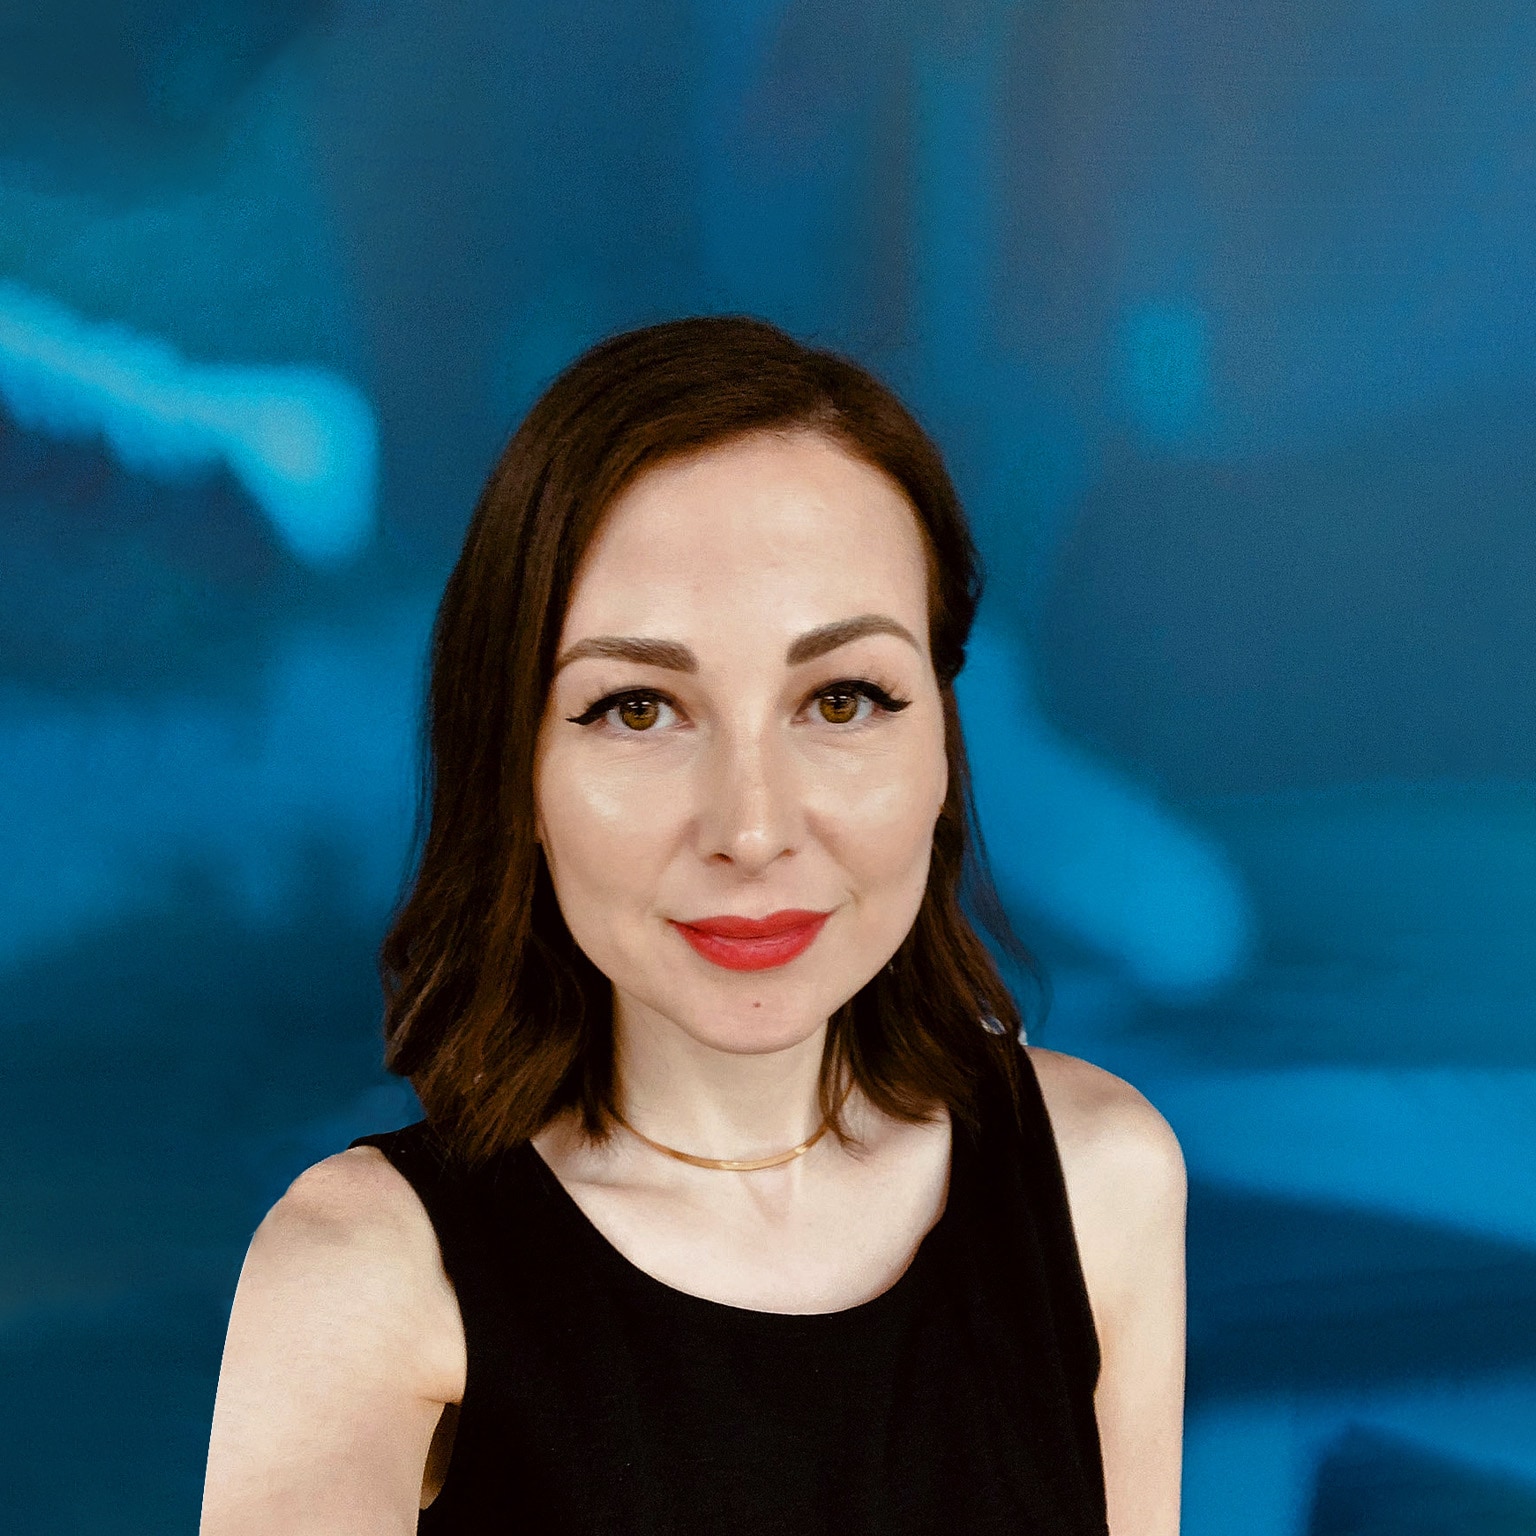 Portrait of Zeinab Hijazi with short dark-brown hair and red lipstick. She is wearing a black tank top and a gold necklace. The background is a blue and white abstract pattern.